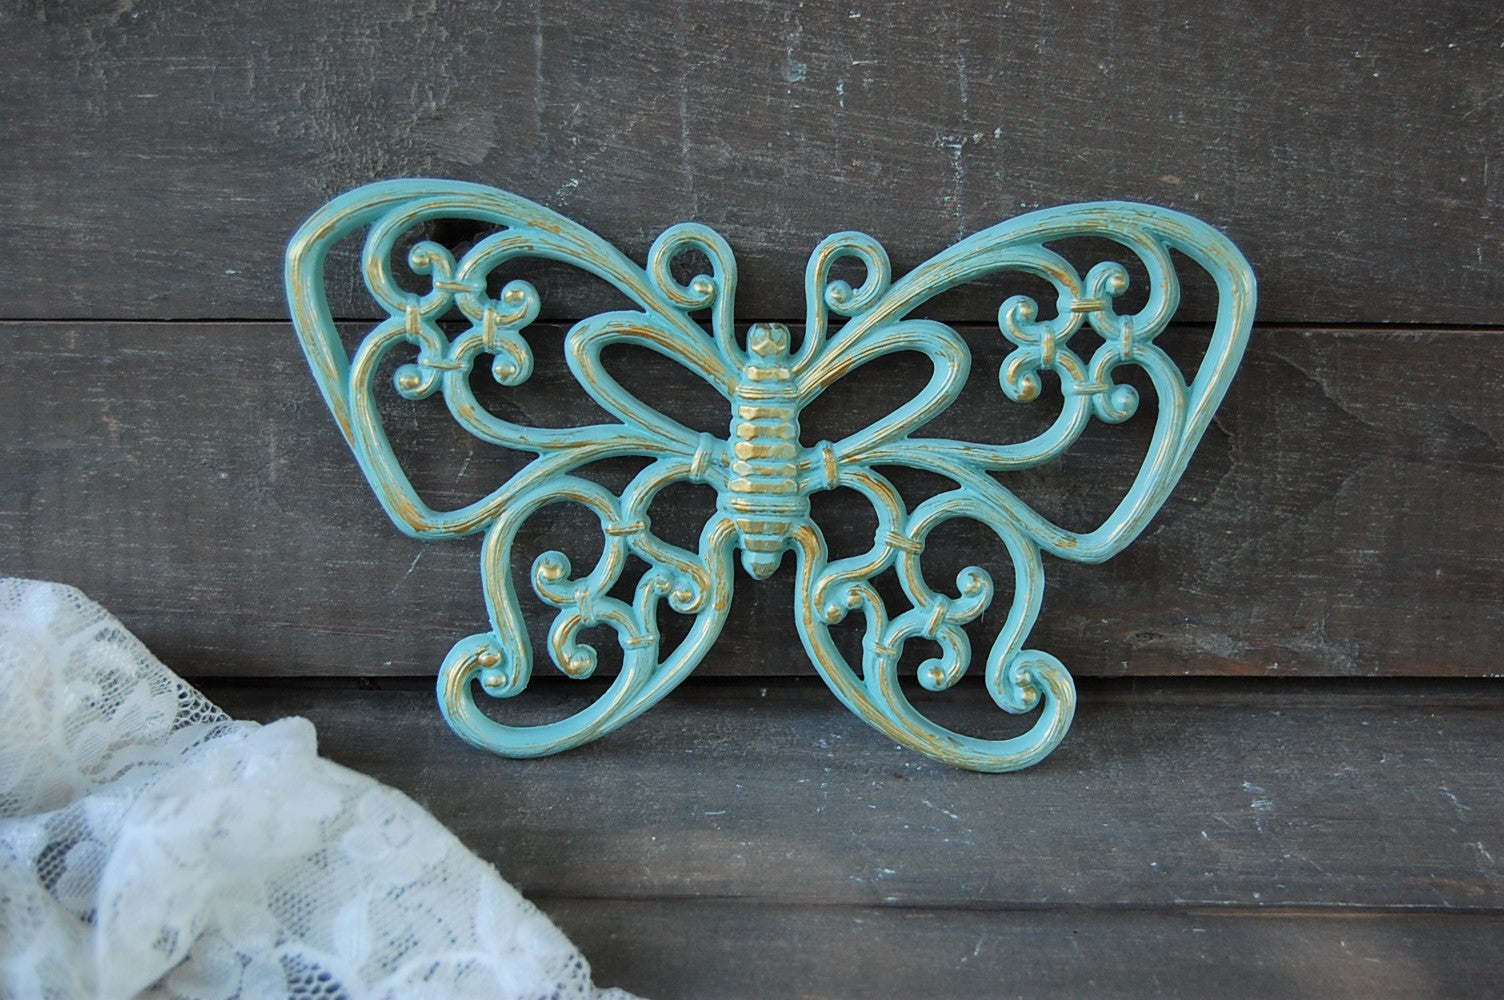 Butterfly wall decor - The Vintage Artistry